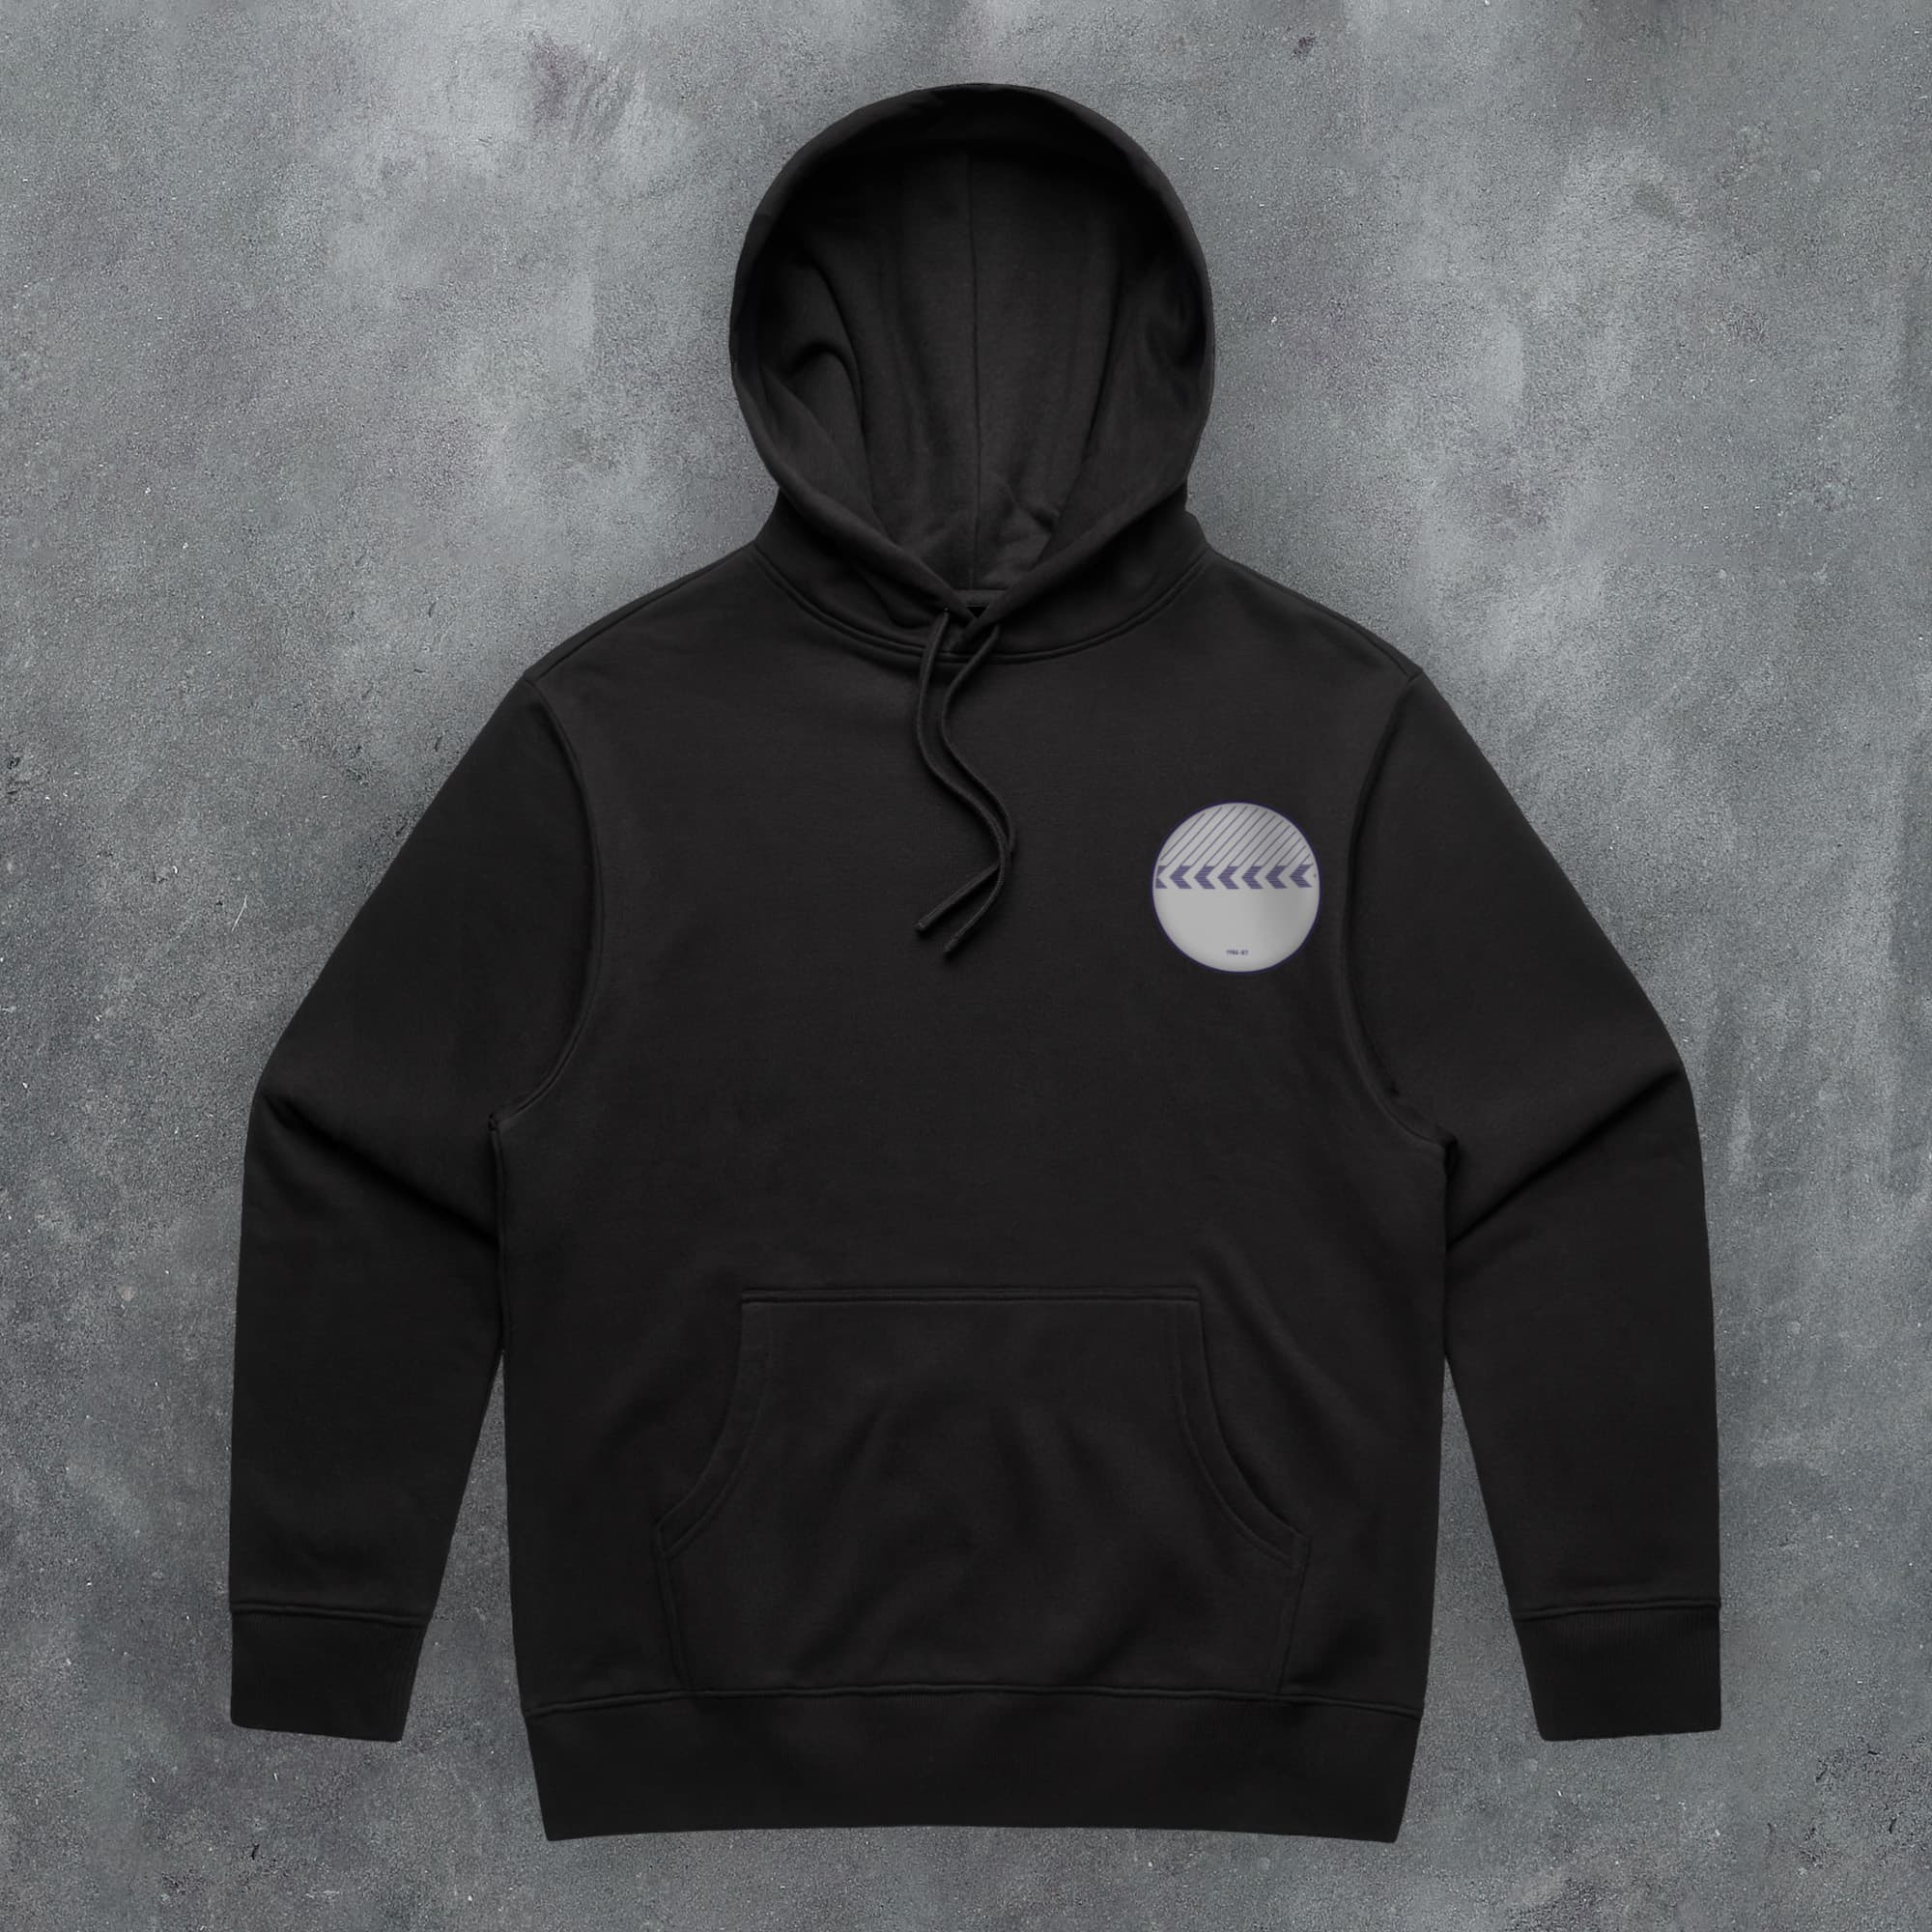 a black hoodie with a white logo on it